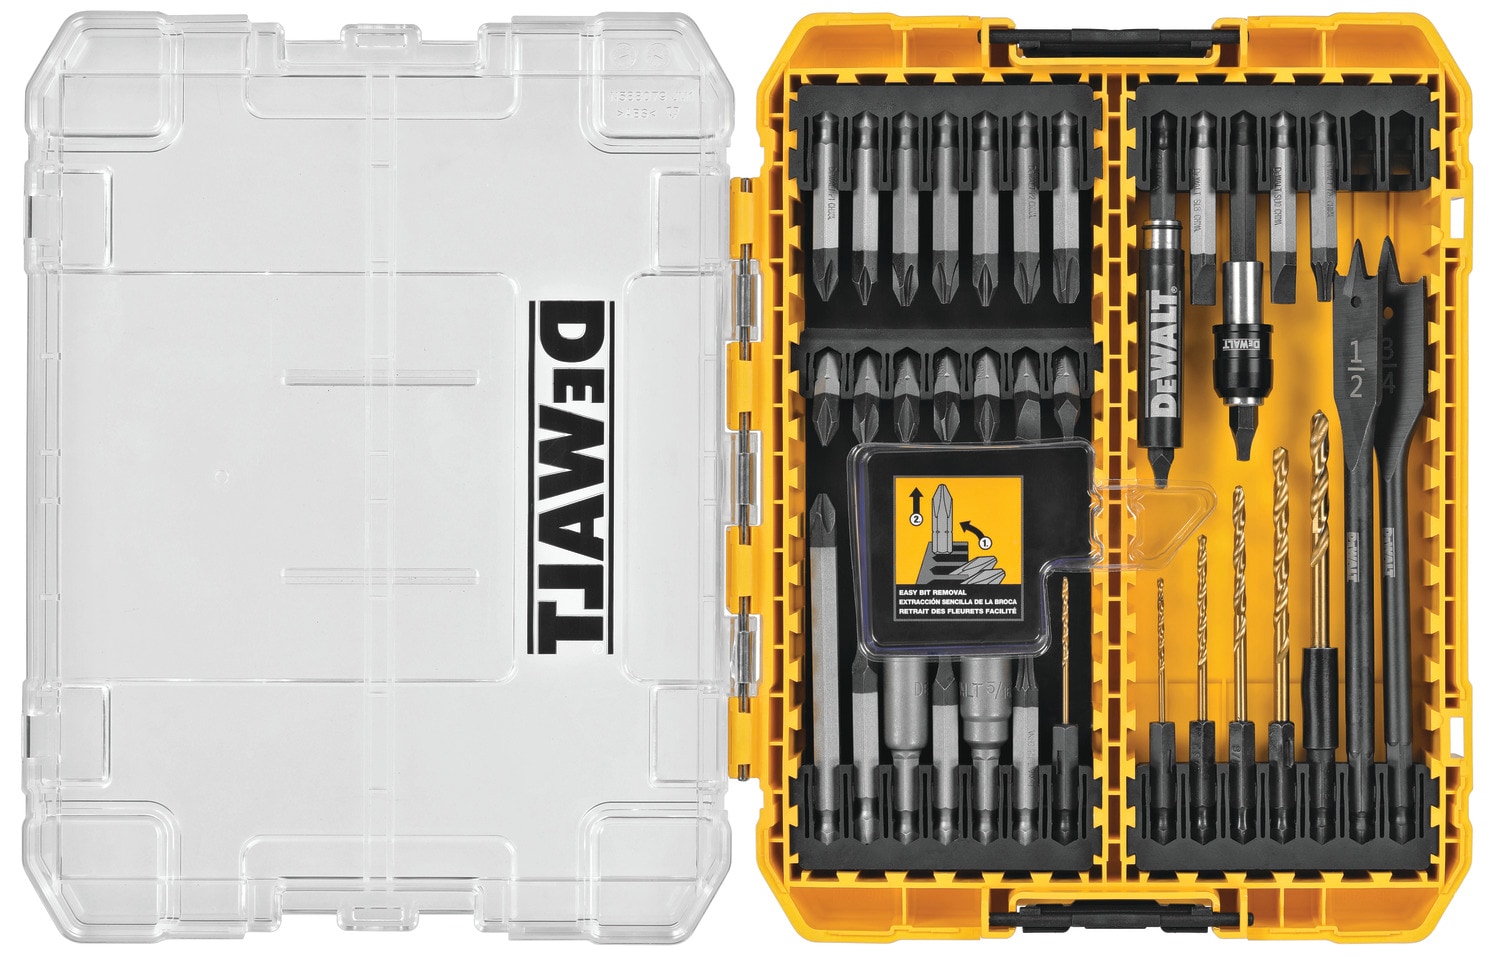 66 Piece Drilling And Screwdriving Drill Driver Bit Set